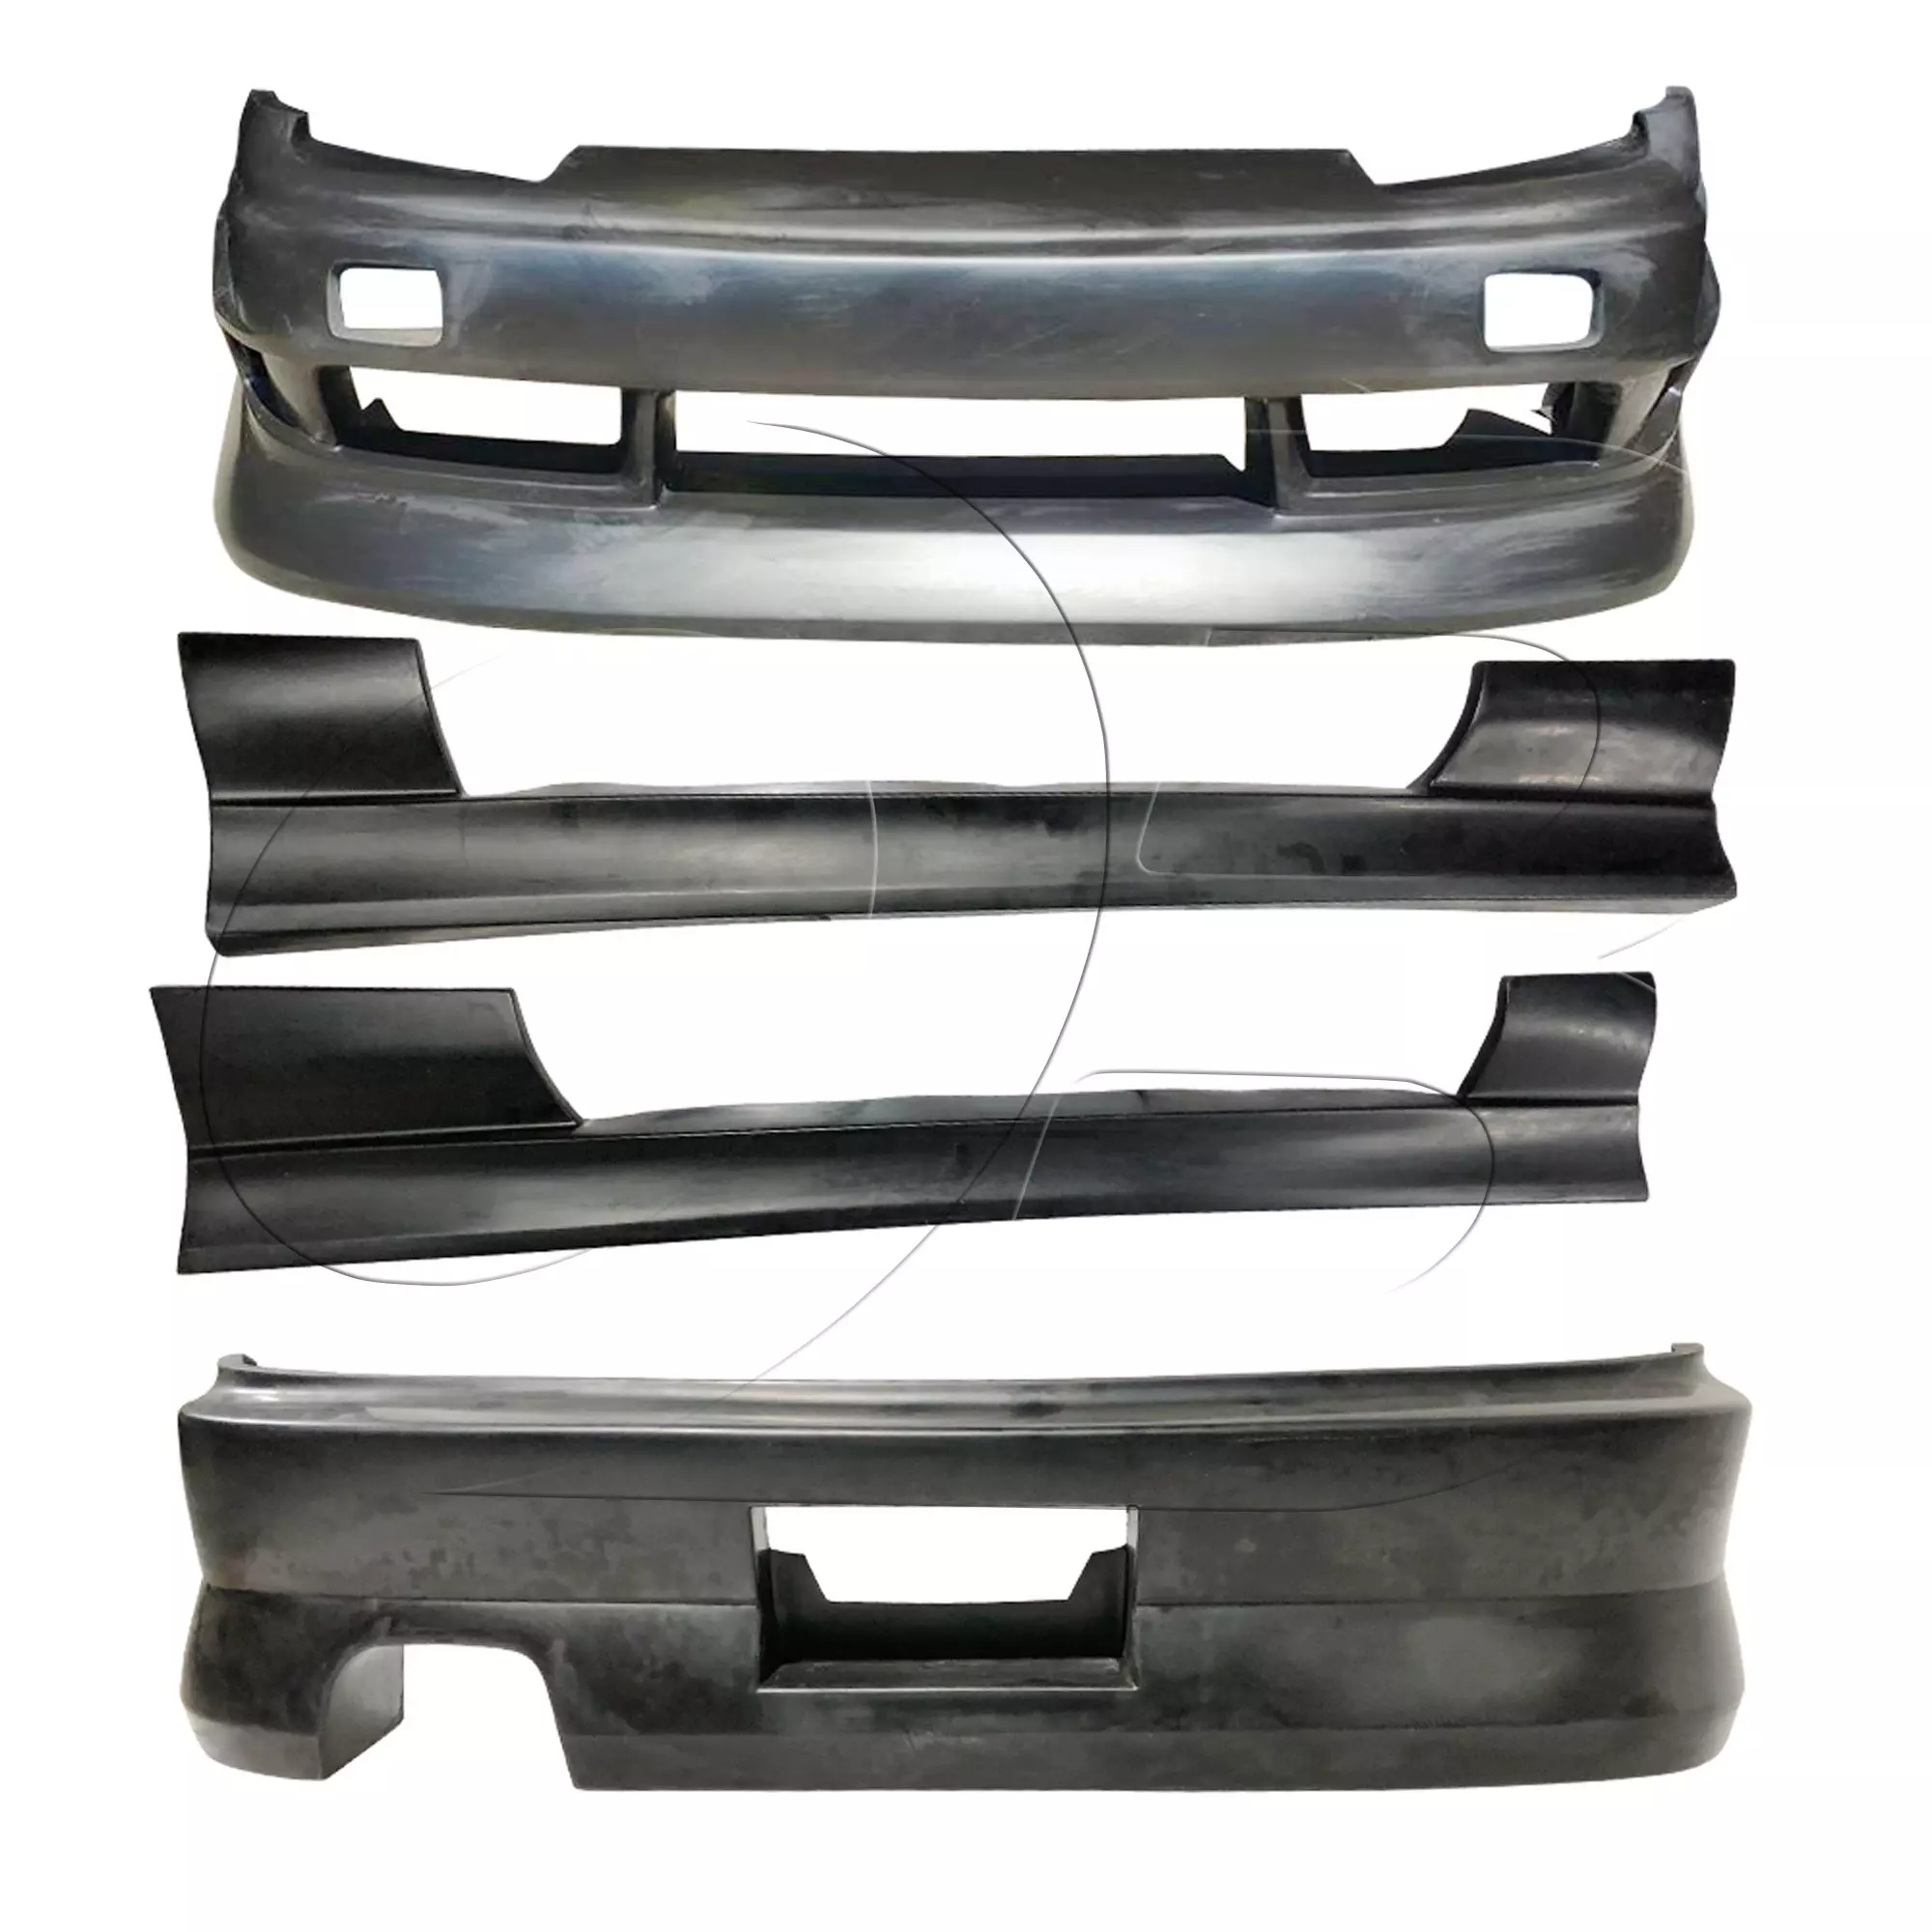 KBD Urethane Bsport2 Style 4pc Full Body Kit > Nissan 240SX 1989-1994 > 2dr Coupe - Image 5